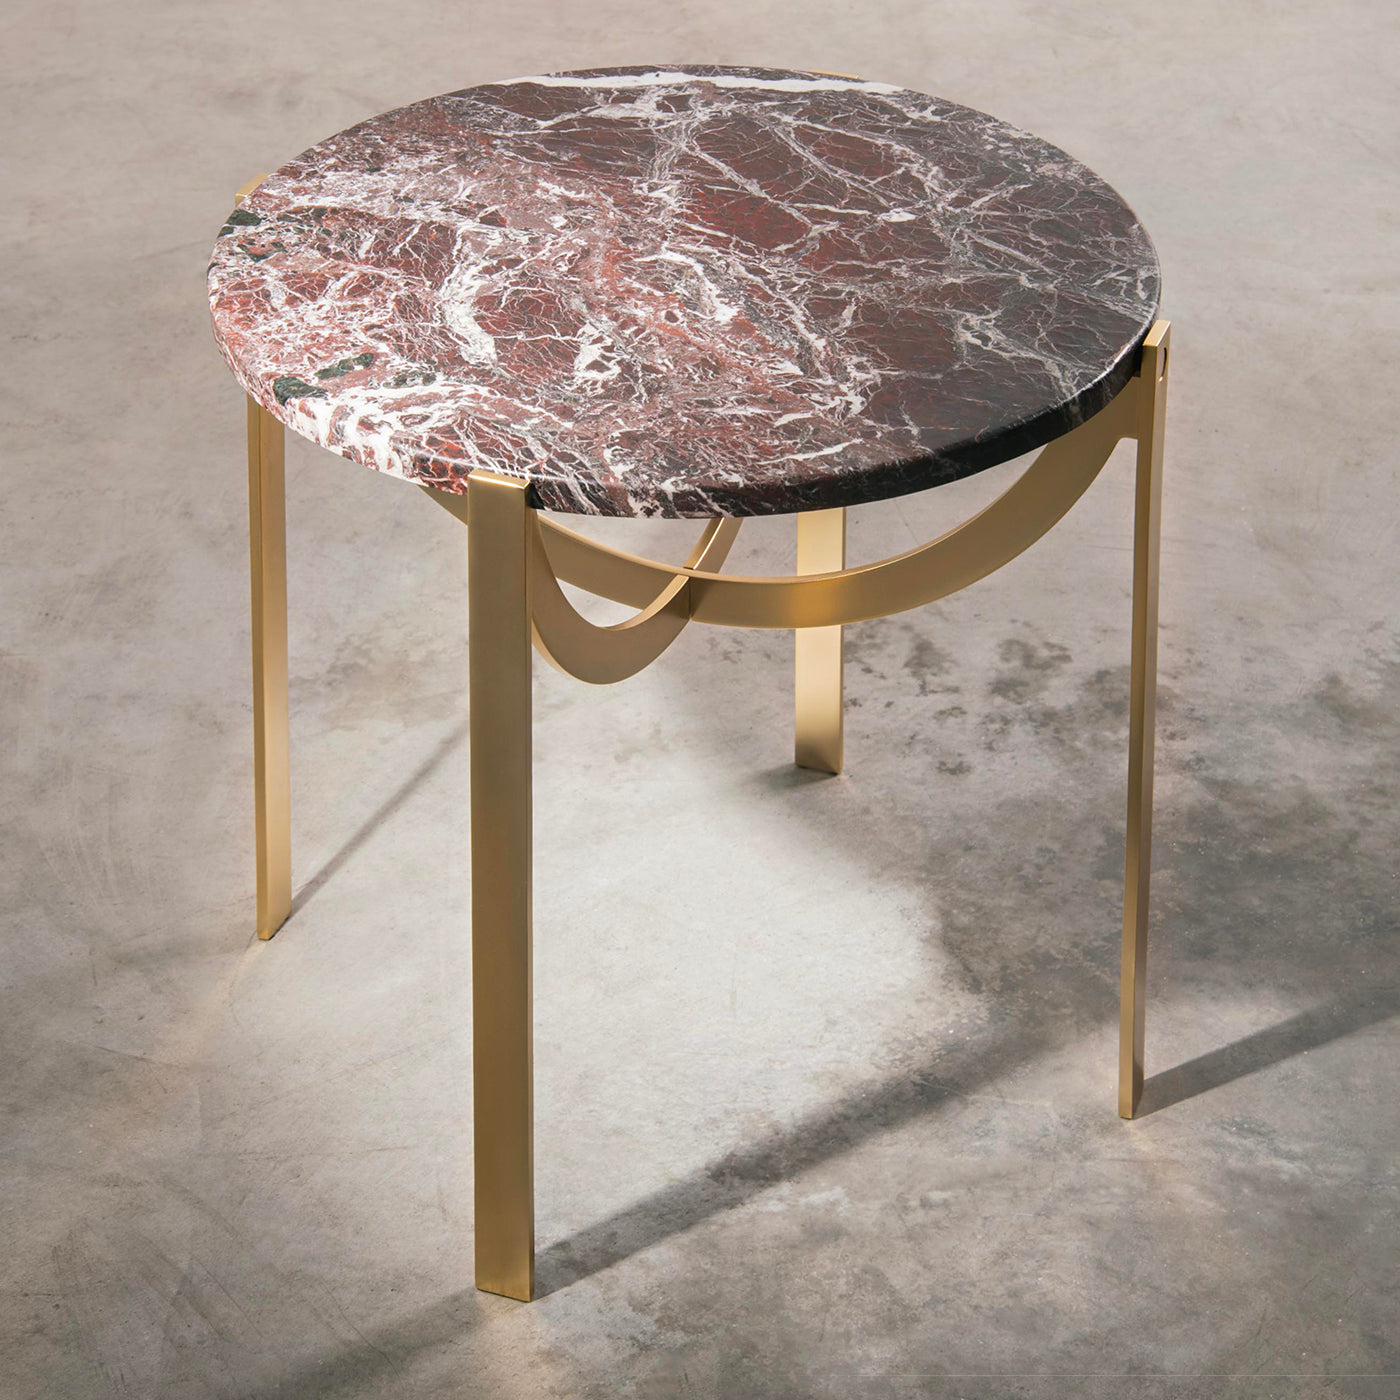 Astra Side Table by Patrick Norguet - Alternative view 3